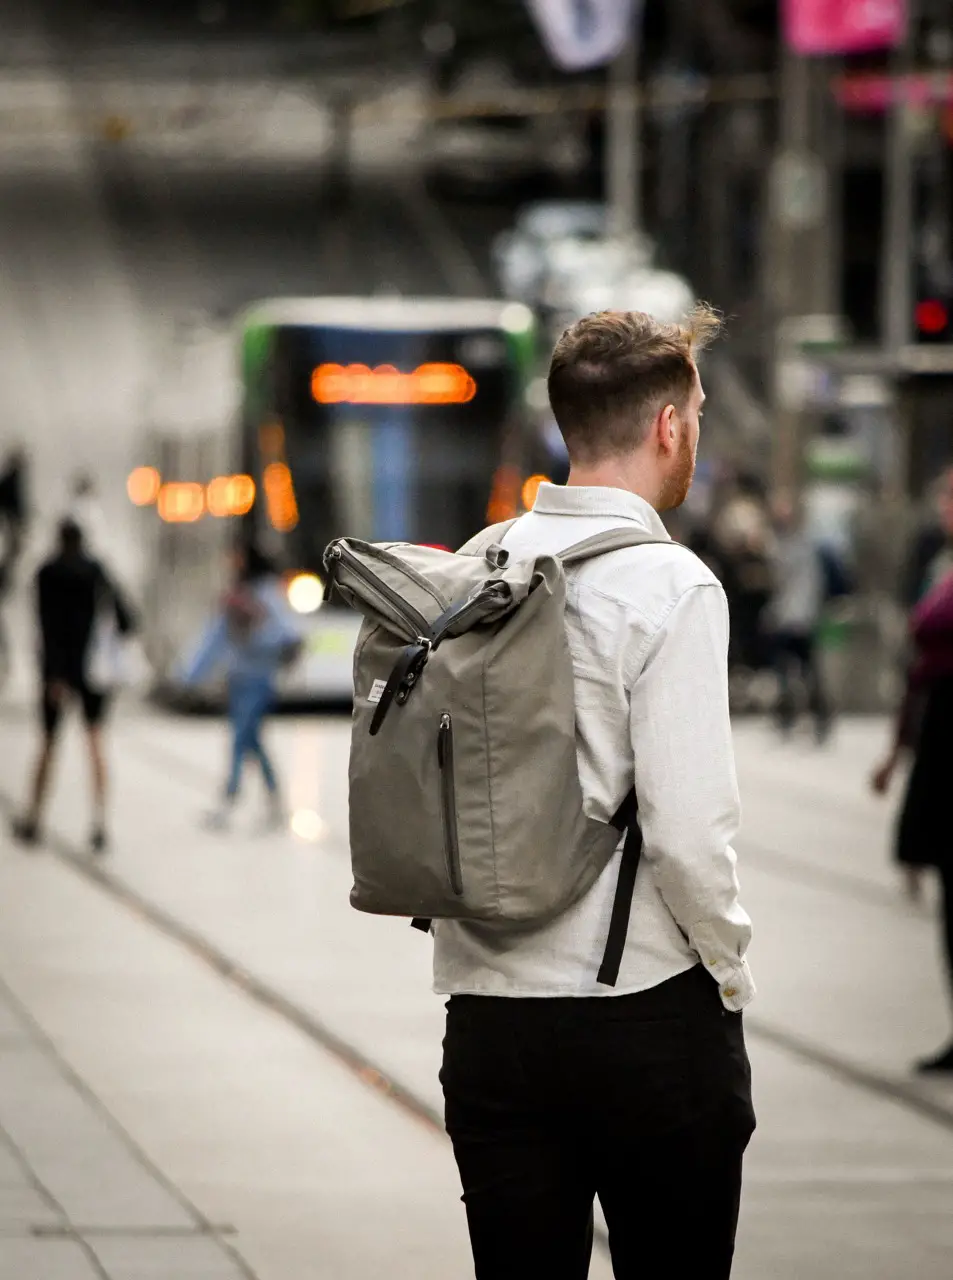 man waiting for train with rucksack backpack on